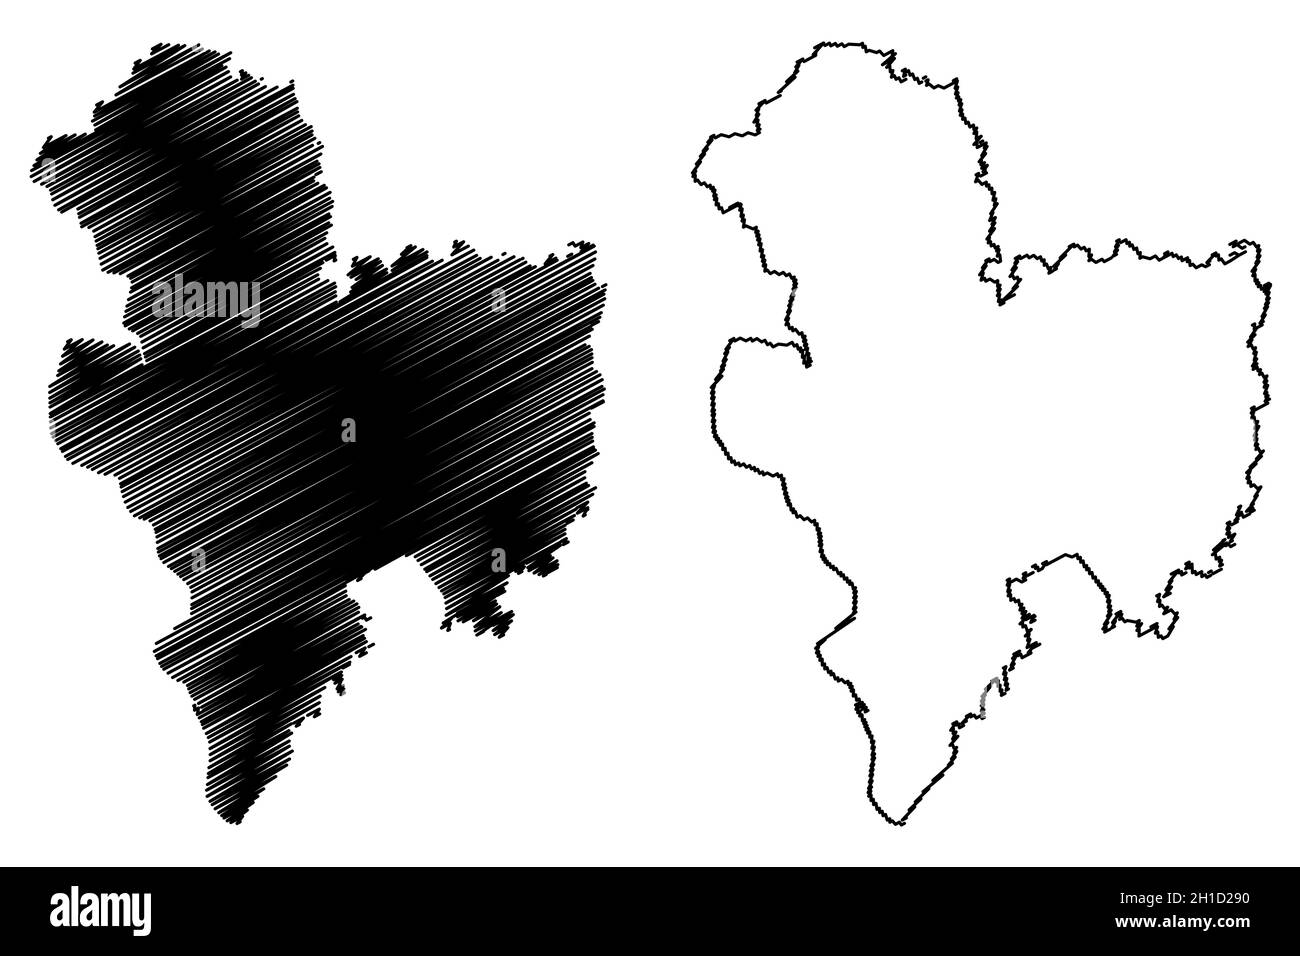 Malda district (West Bengal State, Republic of India) map vector ...